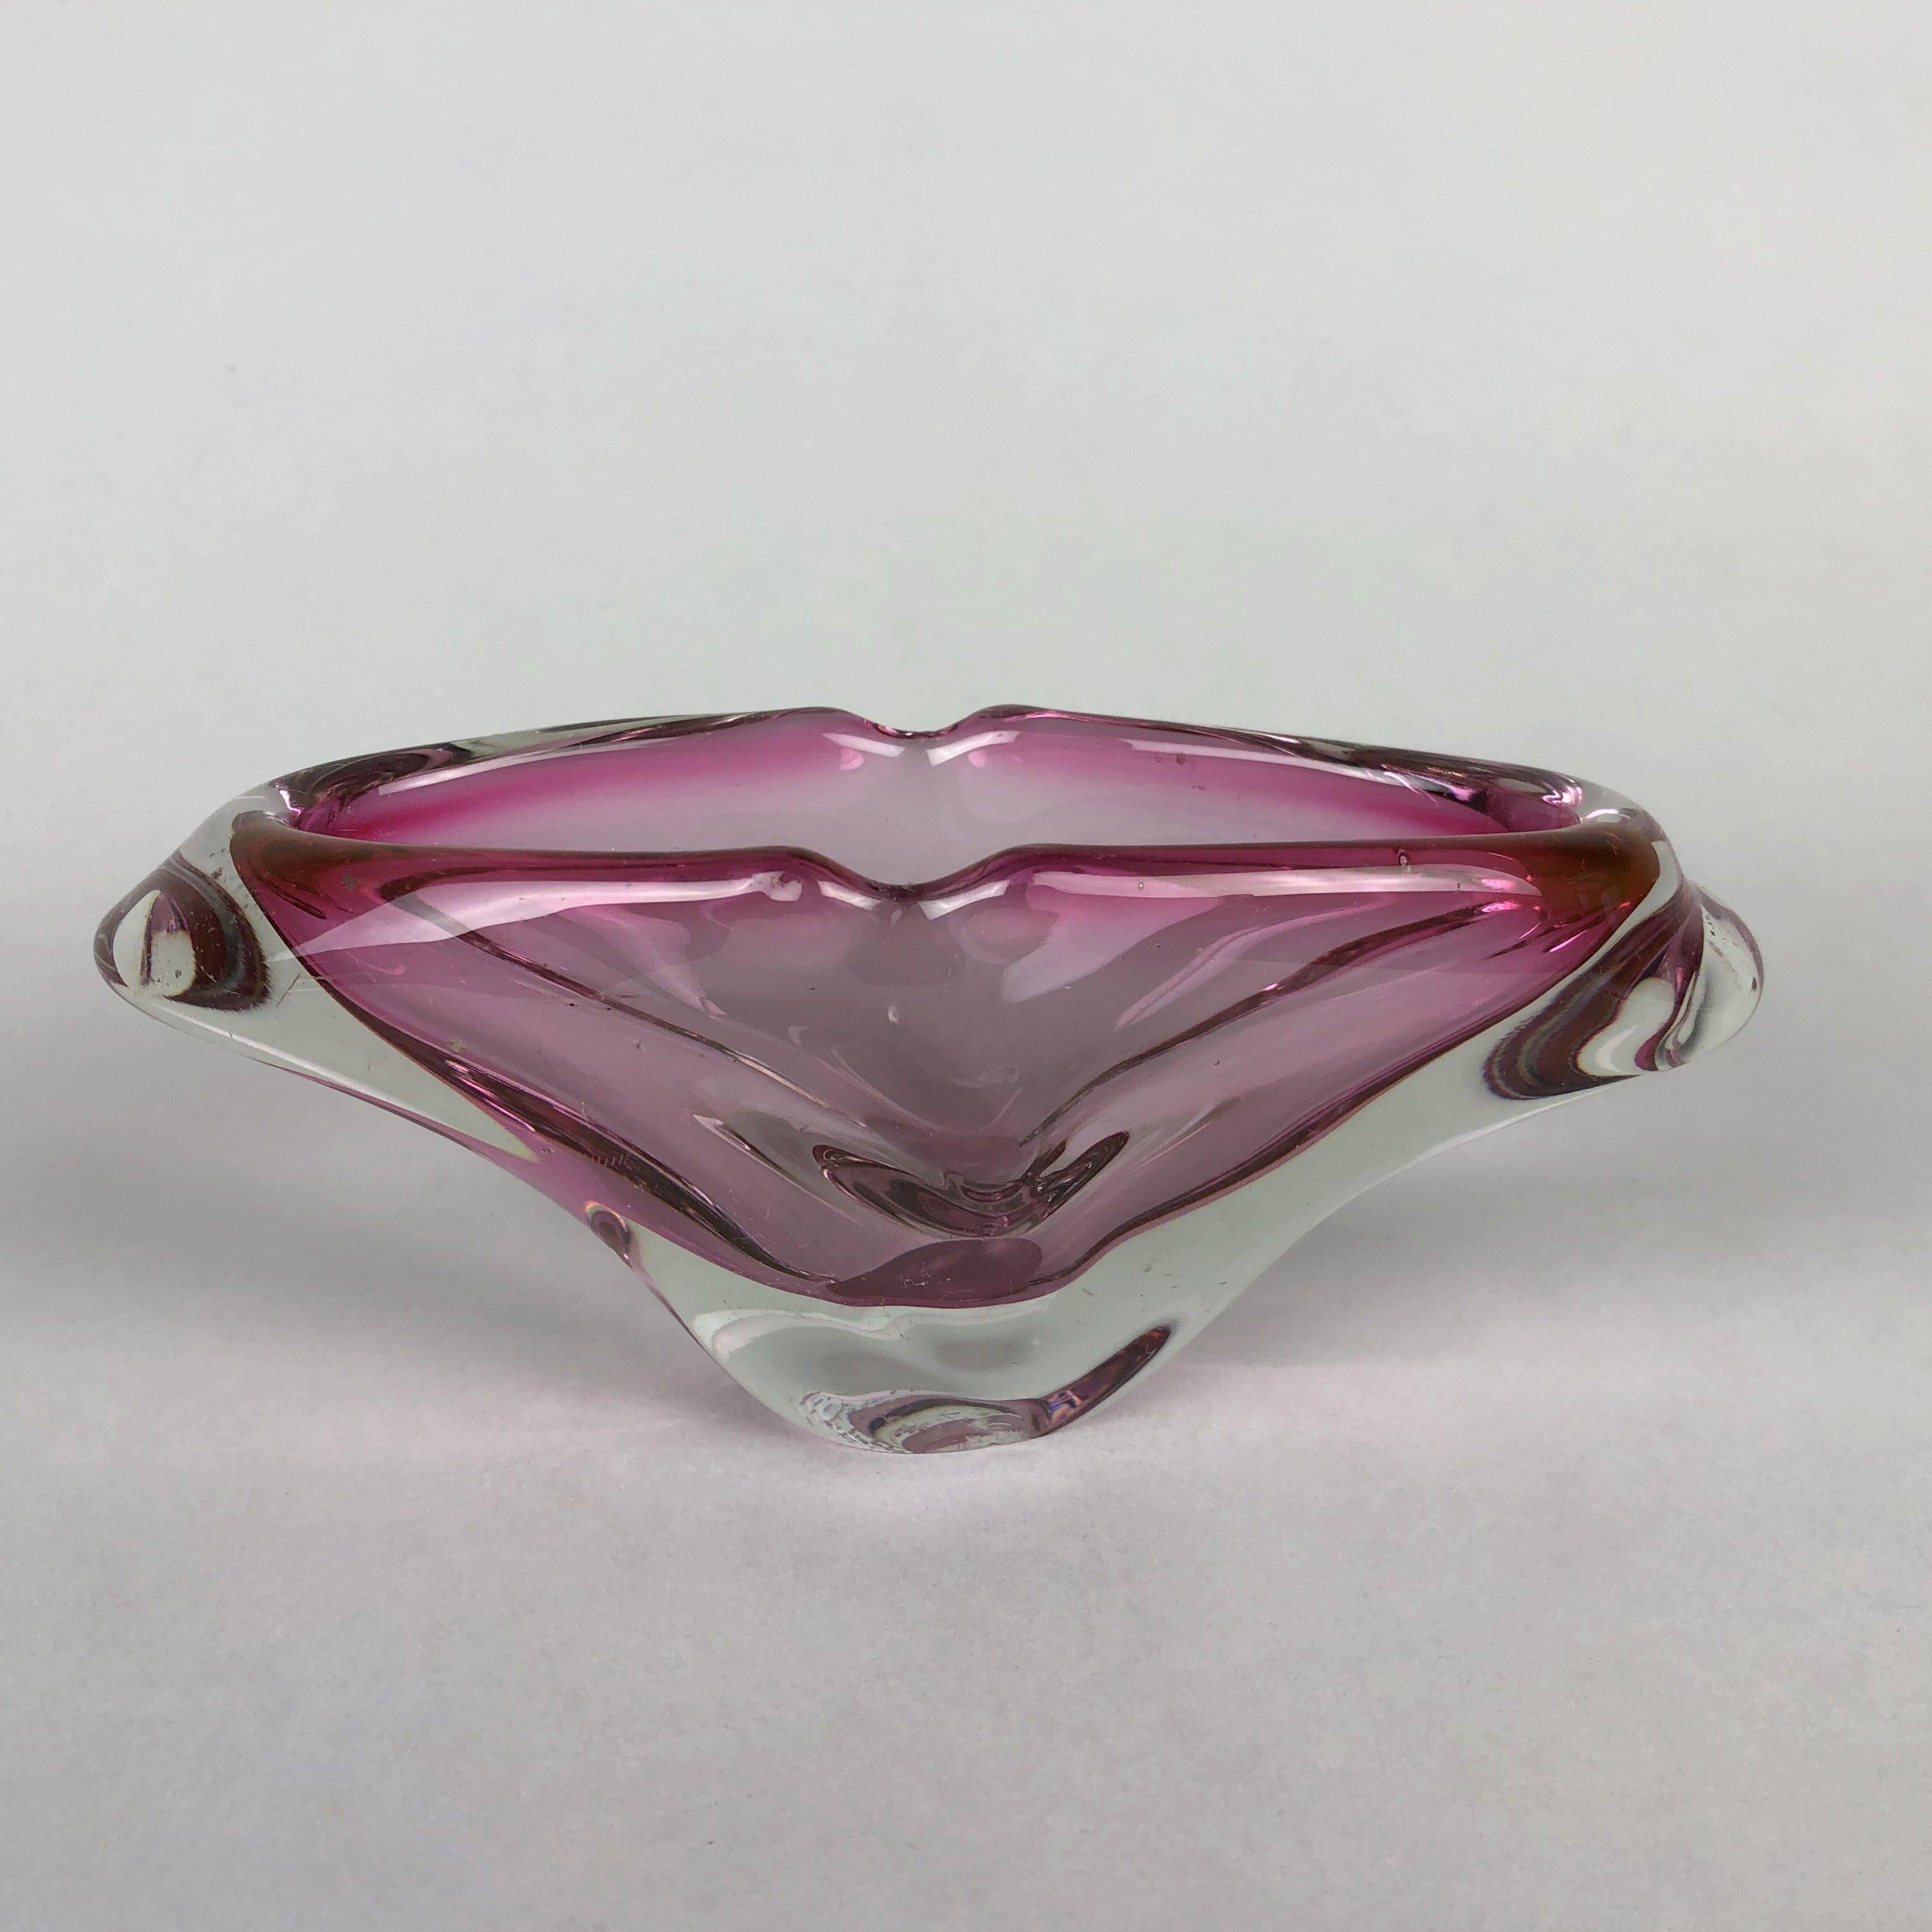 Vintage art glass ashtray. Heavy pink / purple glass. Good vintage condition with just some signs of use.